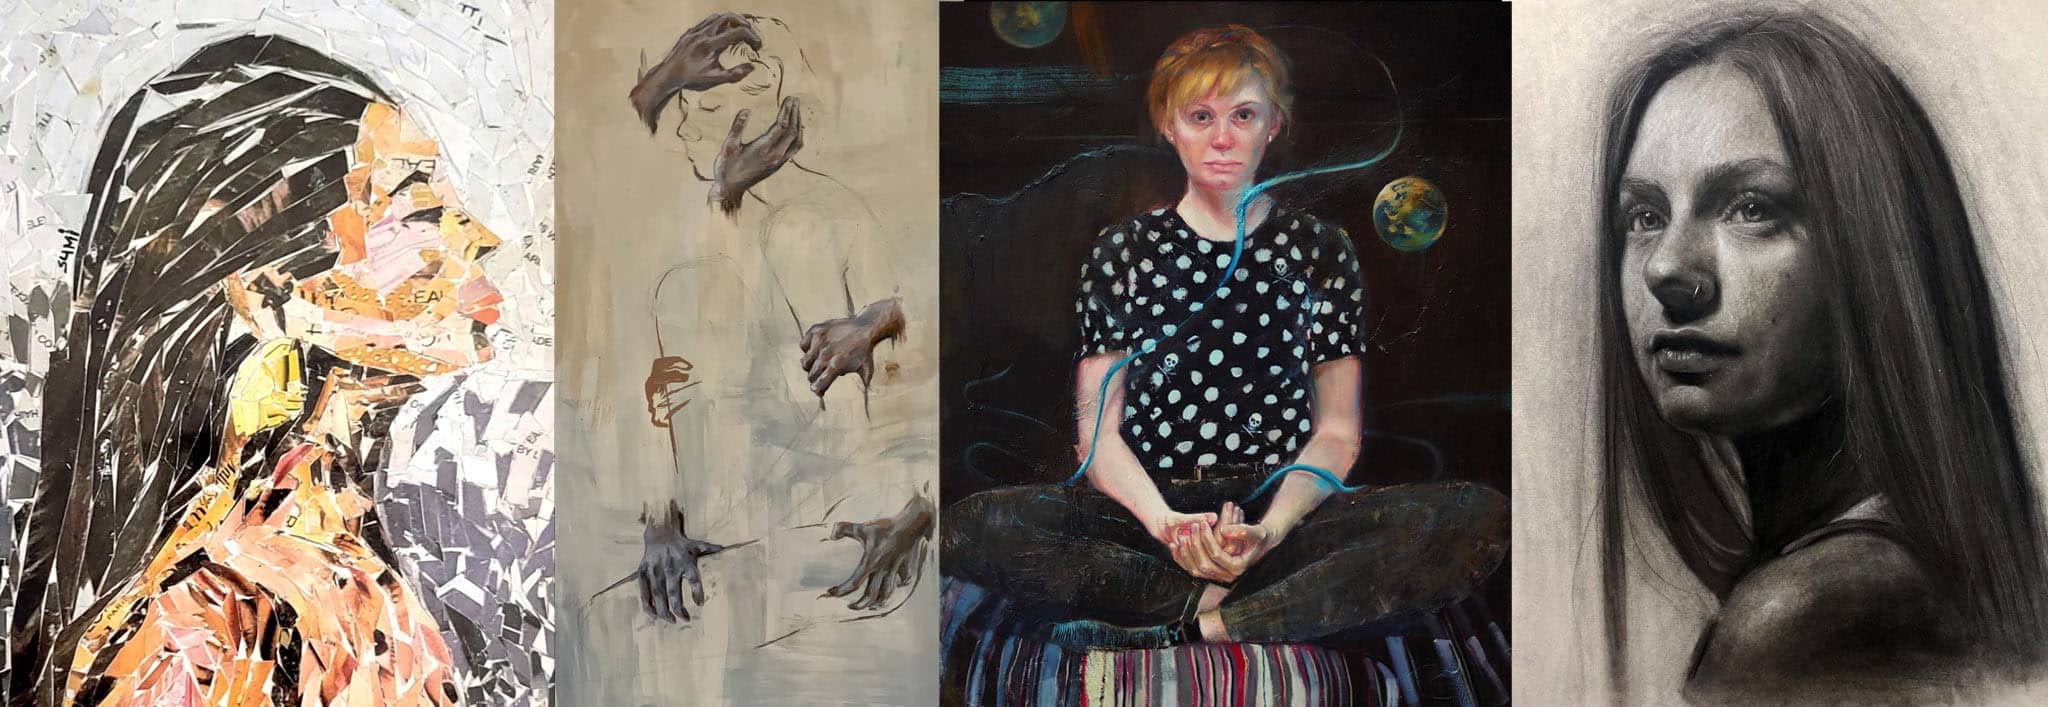 4 pieces by different female artists depicting self-portraits